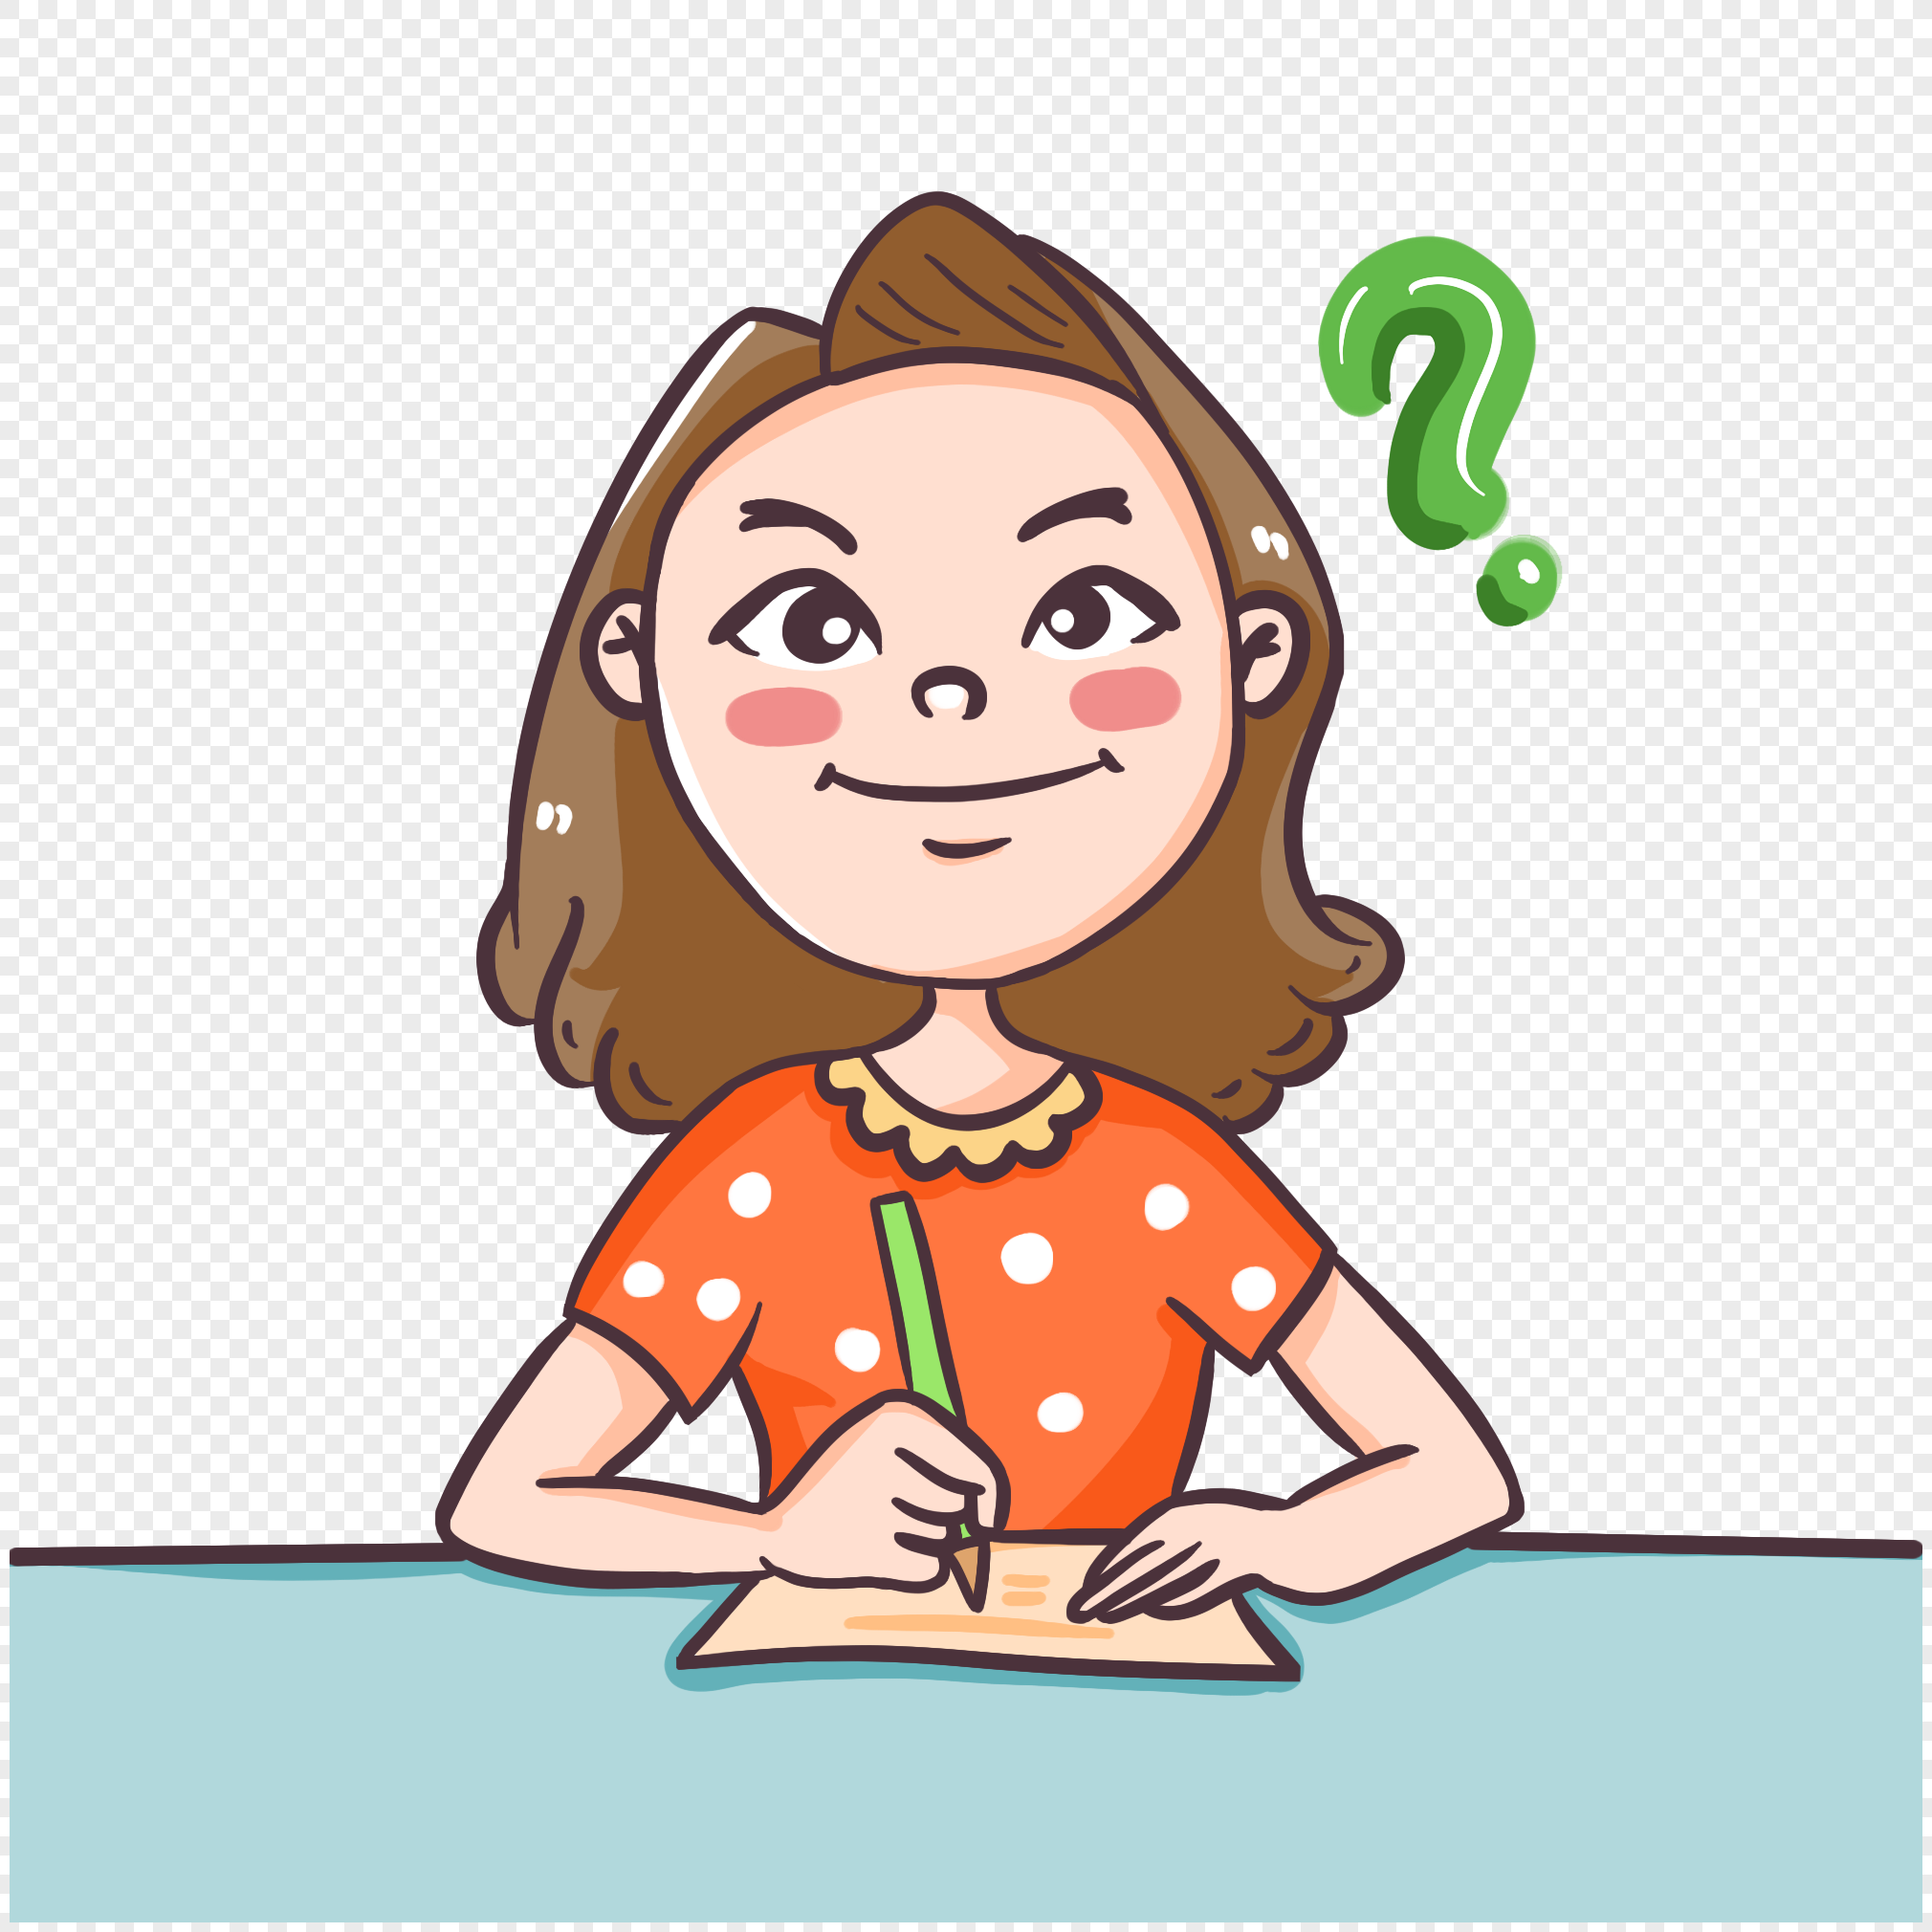 Girl who writes homework during the school quarter, writing girl, school writing, quarter back png transparent image